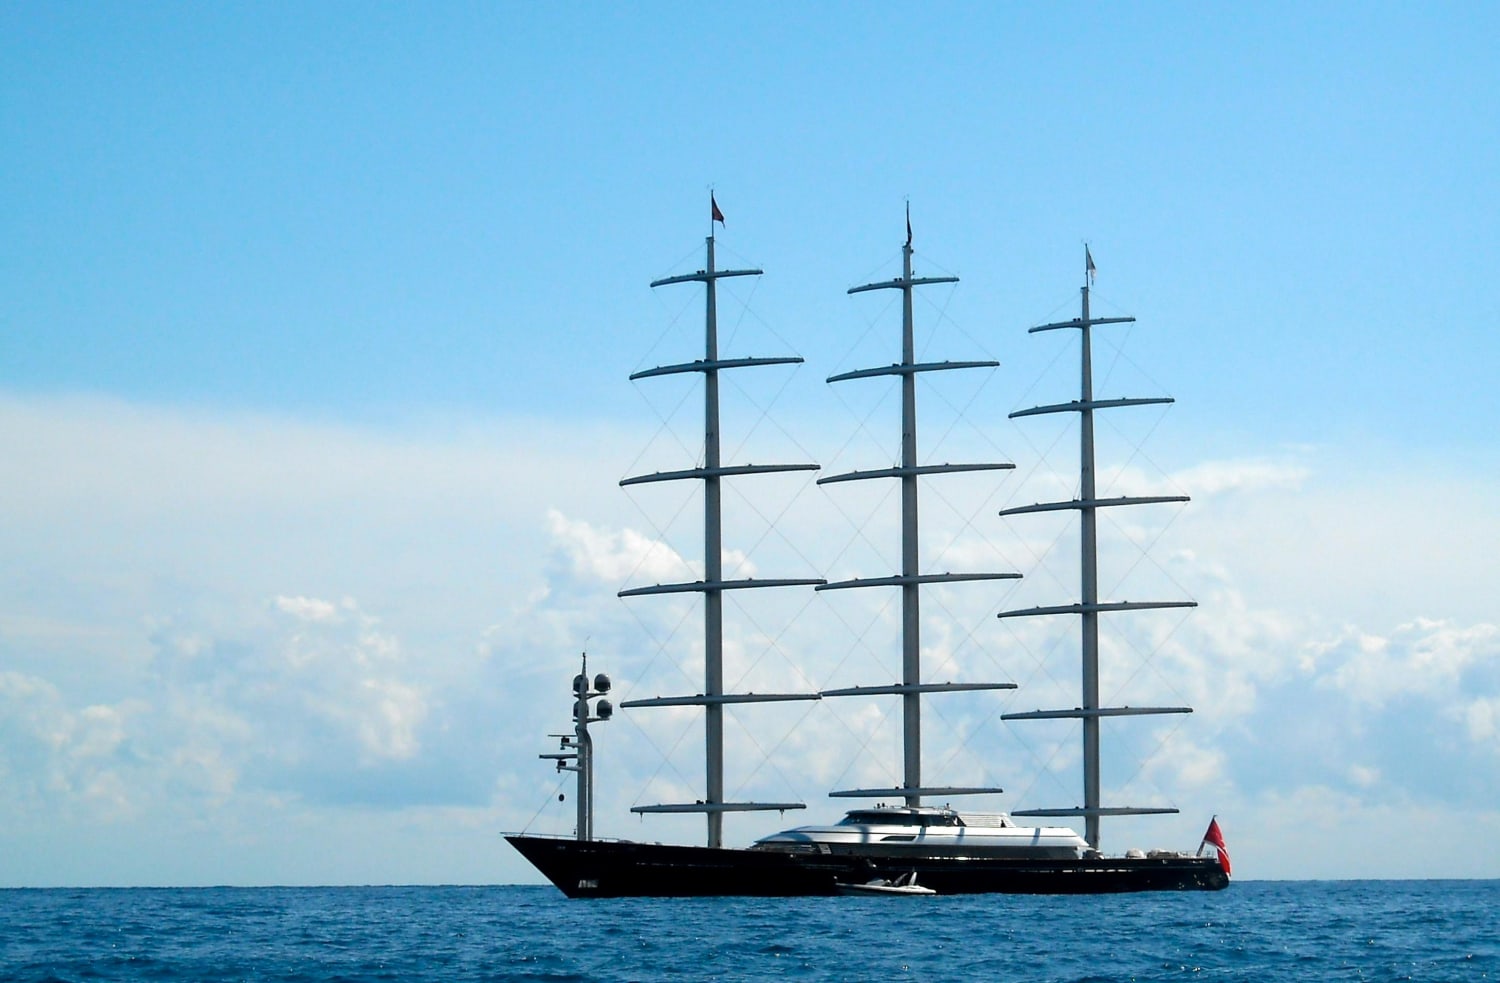 The Maltese Falcon. 191ft/57m tall. Gives me the creeps seeing it without its sails.